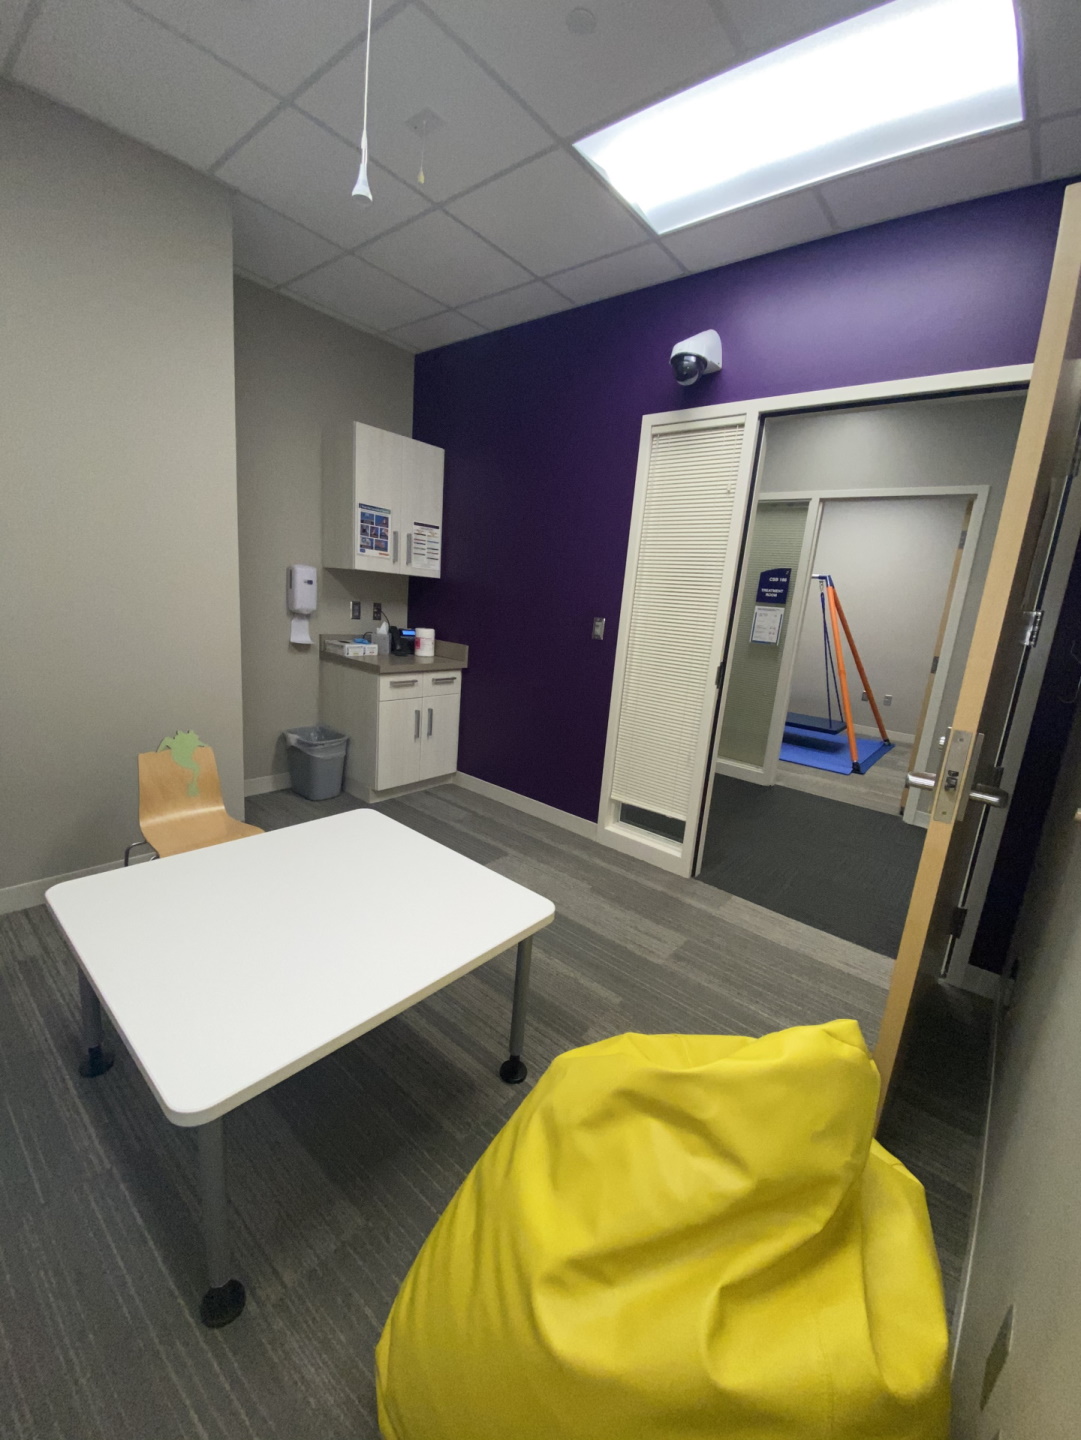 Pediatric therapy room with sink in background and table with yellow bean bag